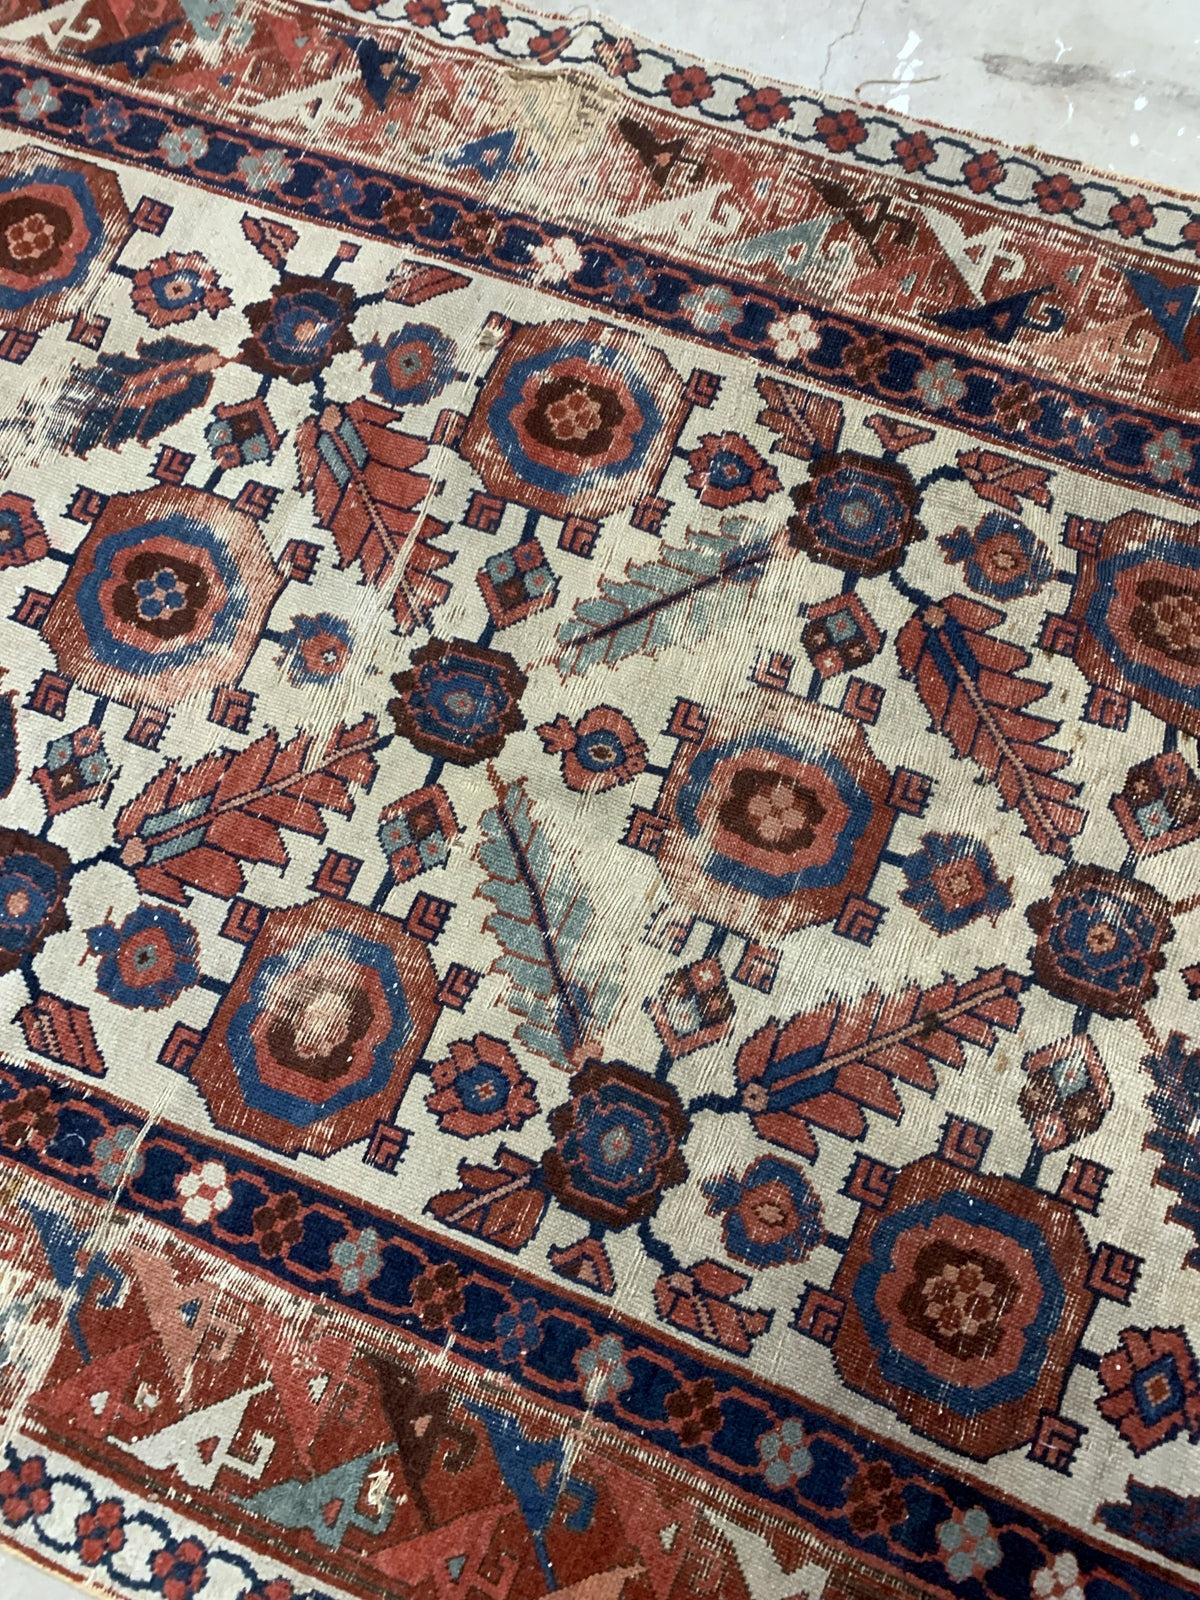 Very old handmade antique North-West Persian rug in white and red background colors. The rug is from the beginning of 19th century in distressed condition.  